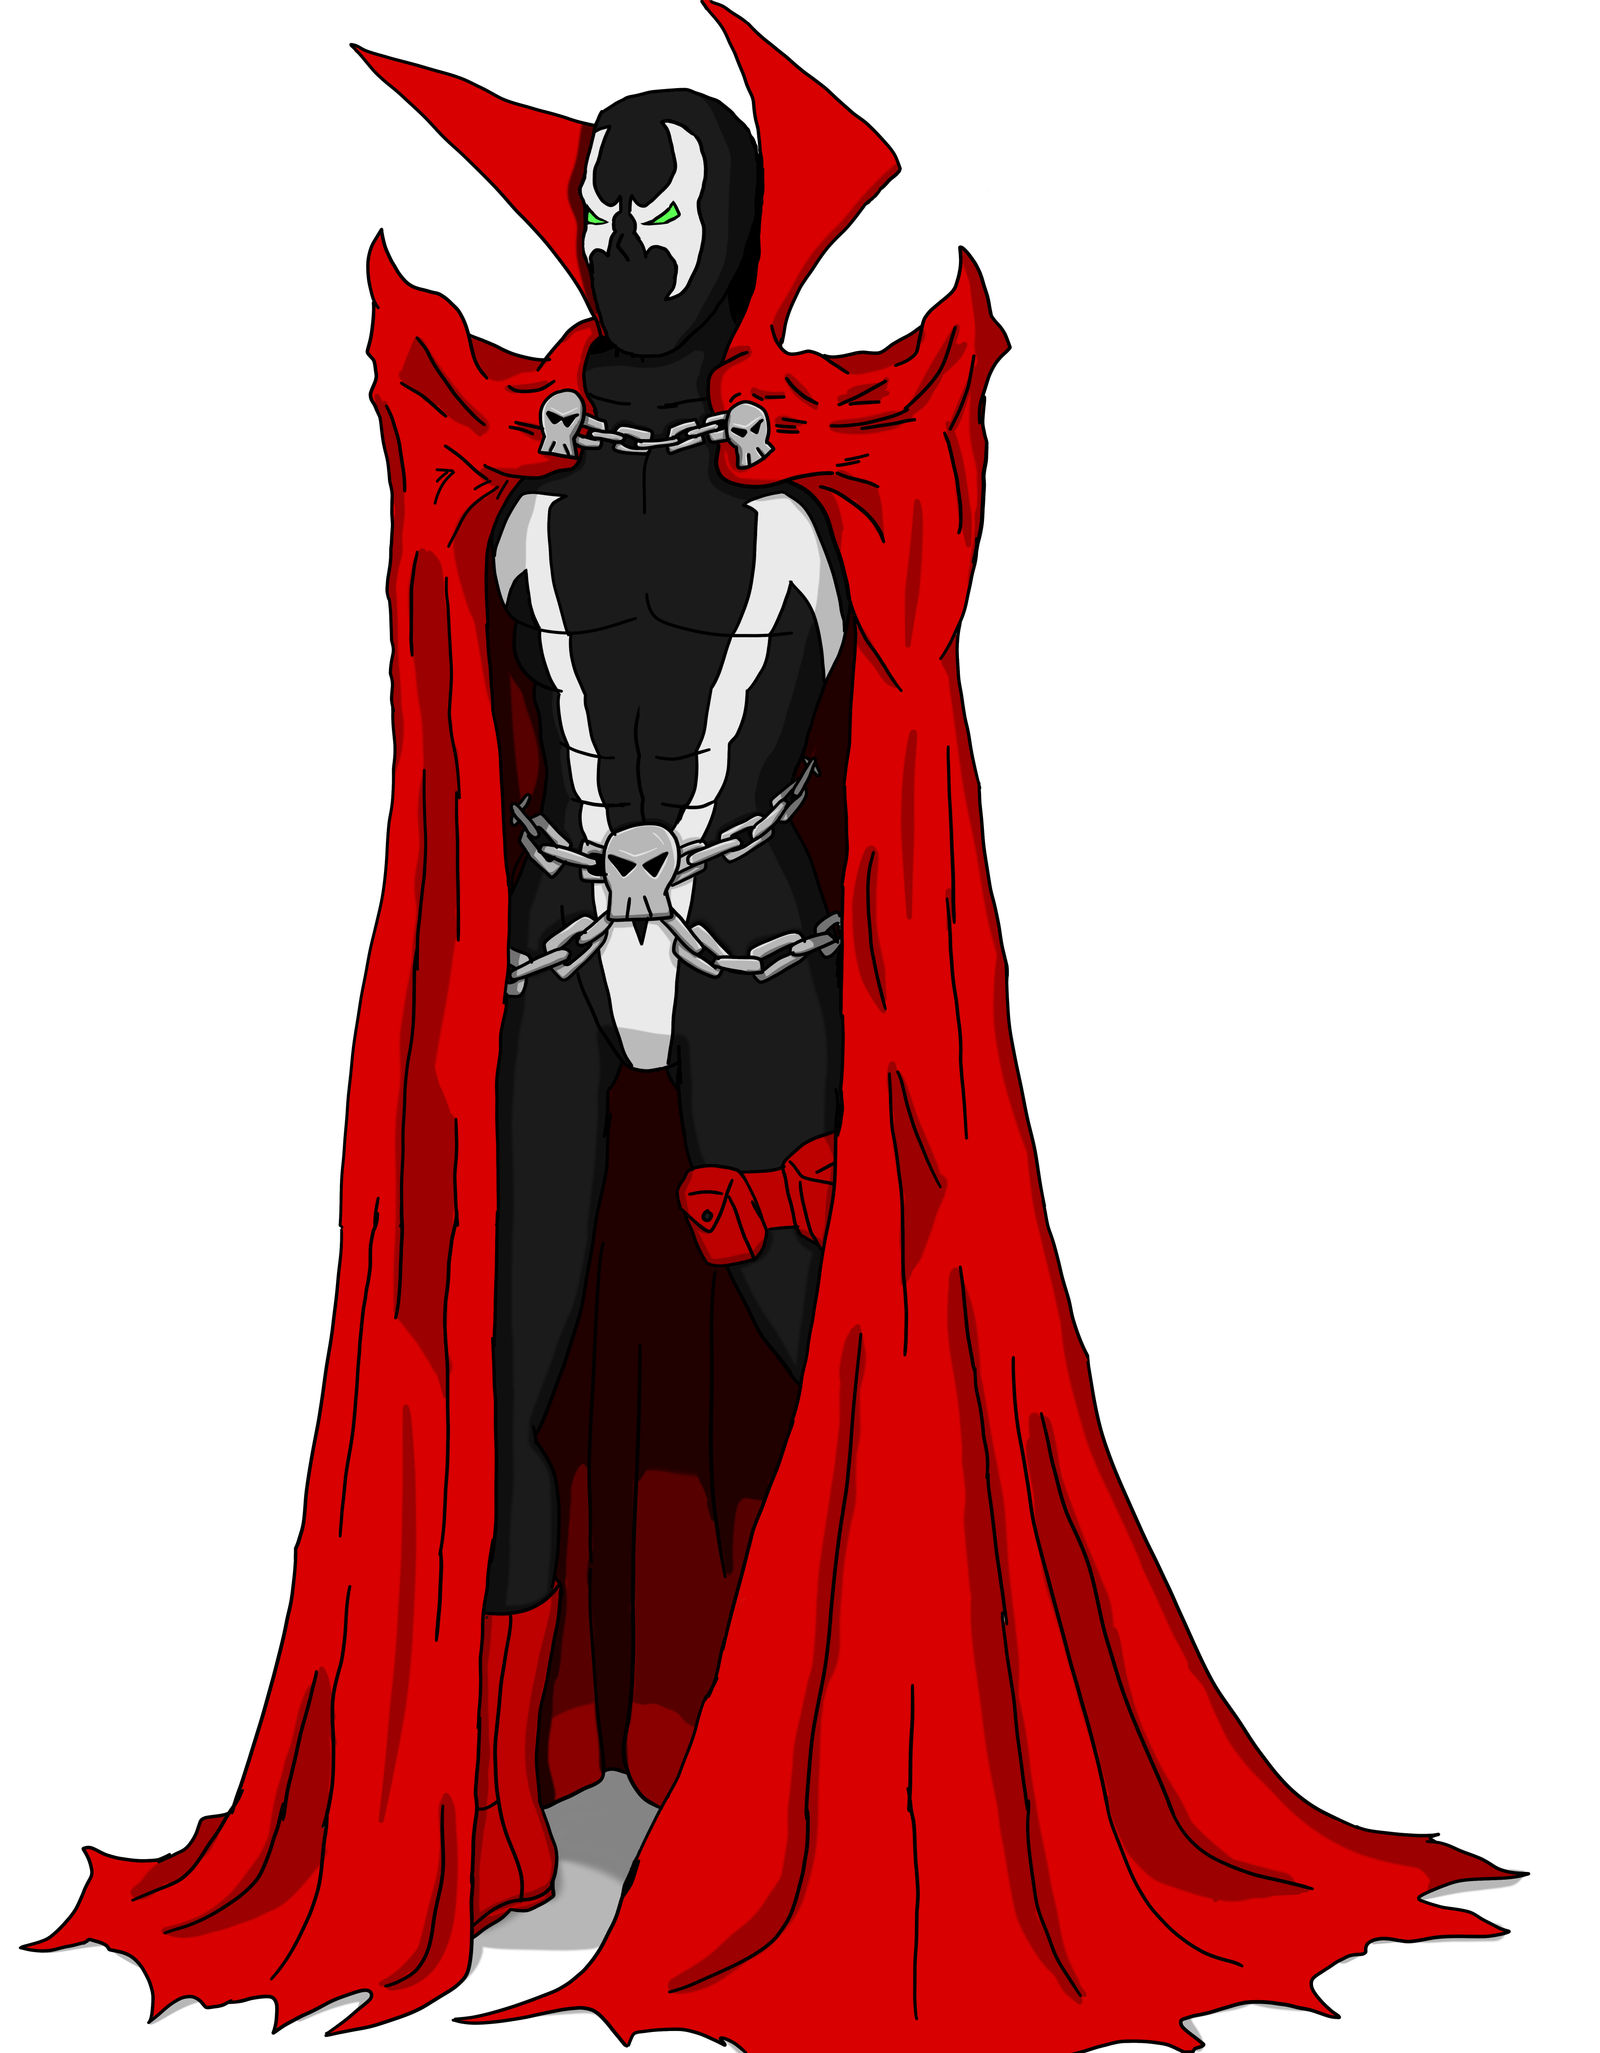 Spawn. Put out the light - My, Drawing, Digital drawing, Art, Spawn, Creation, Tablet, Image Comics